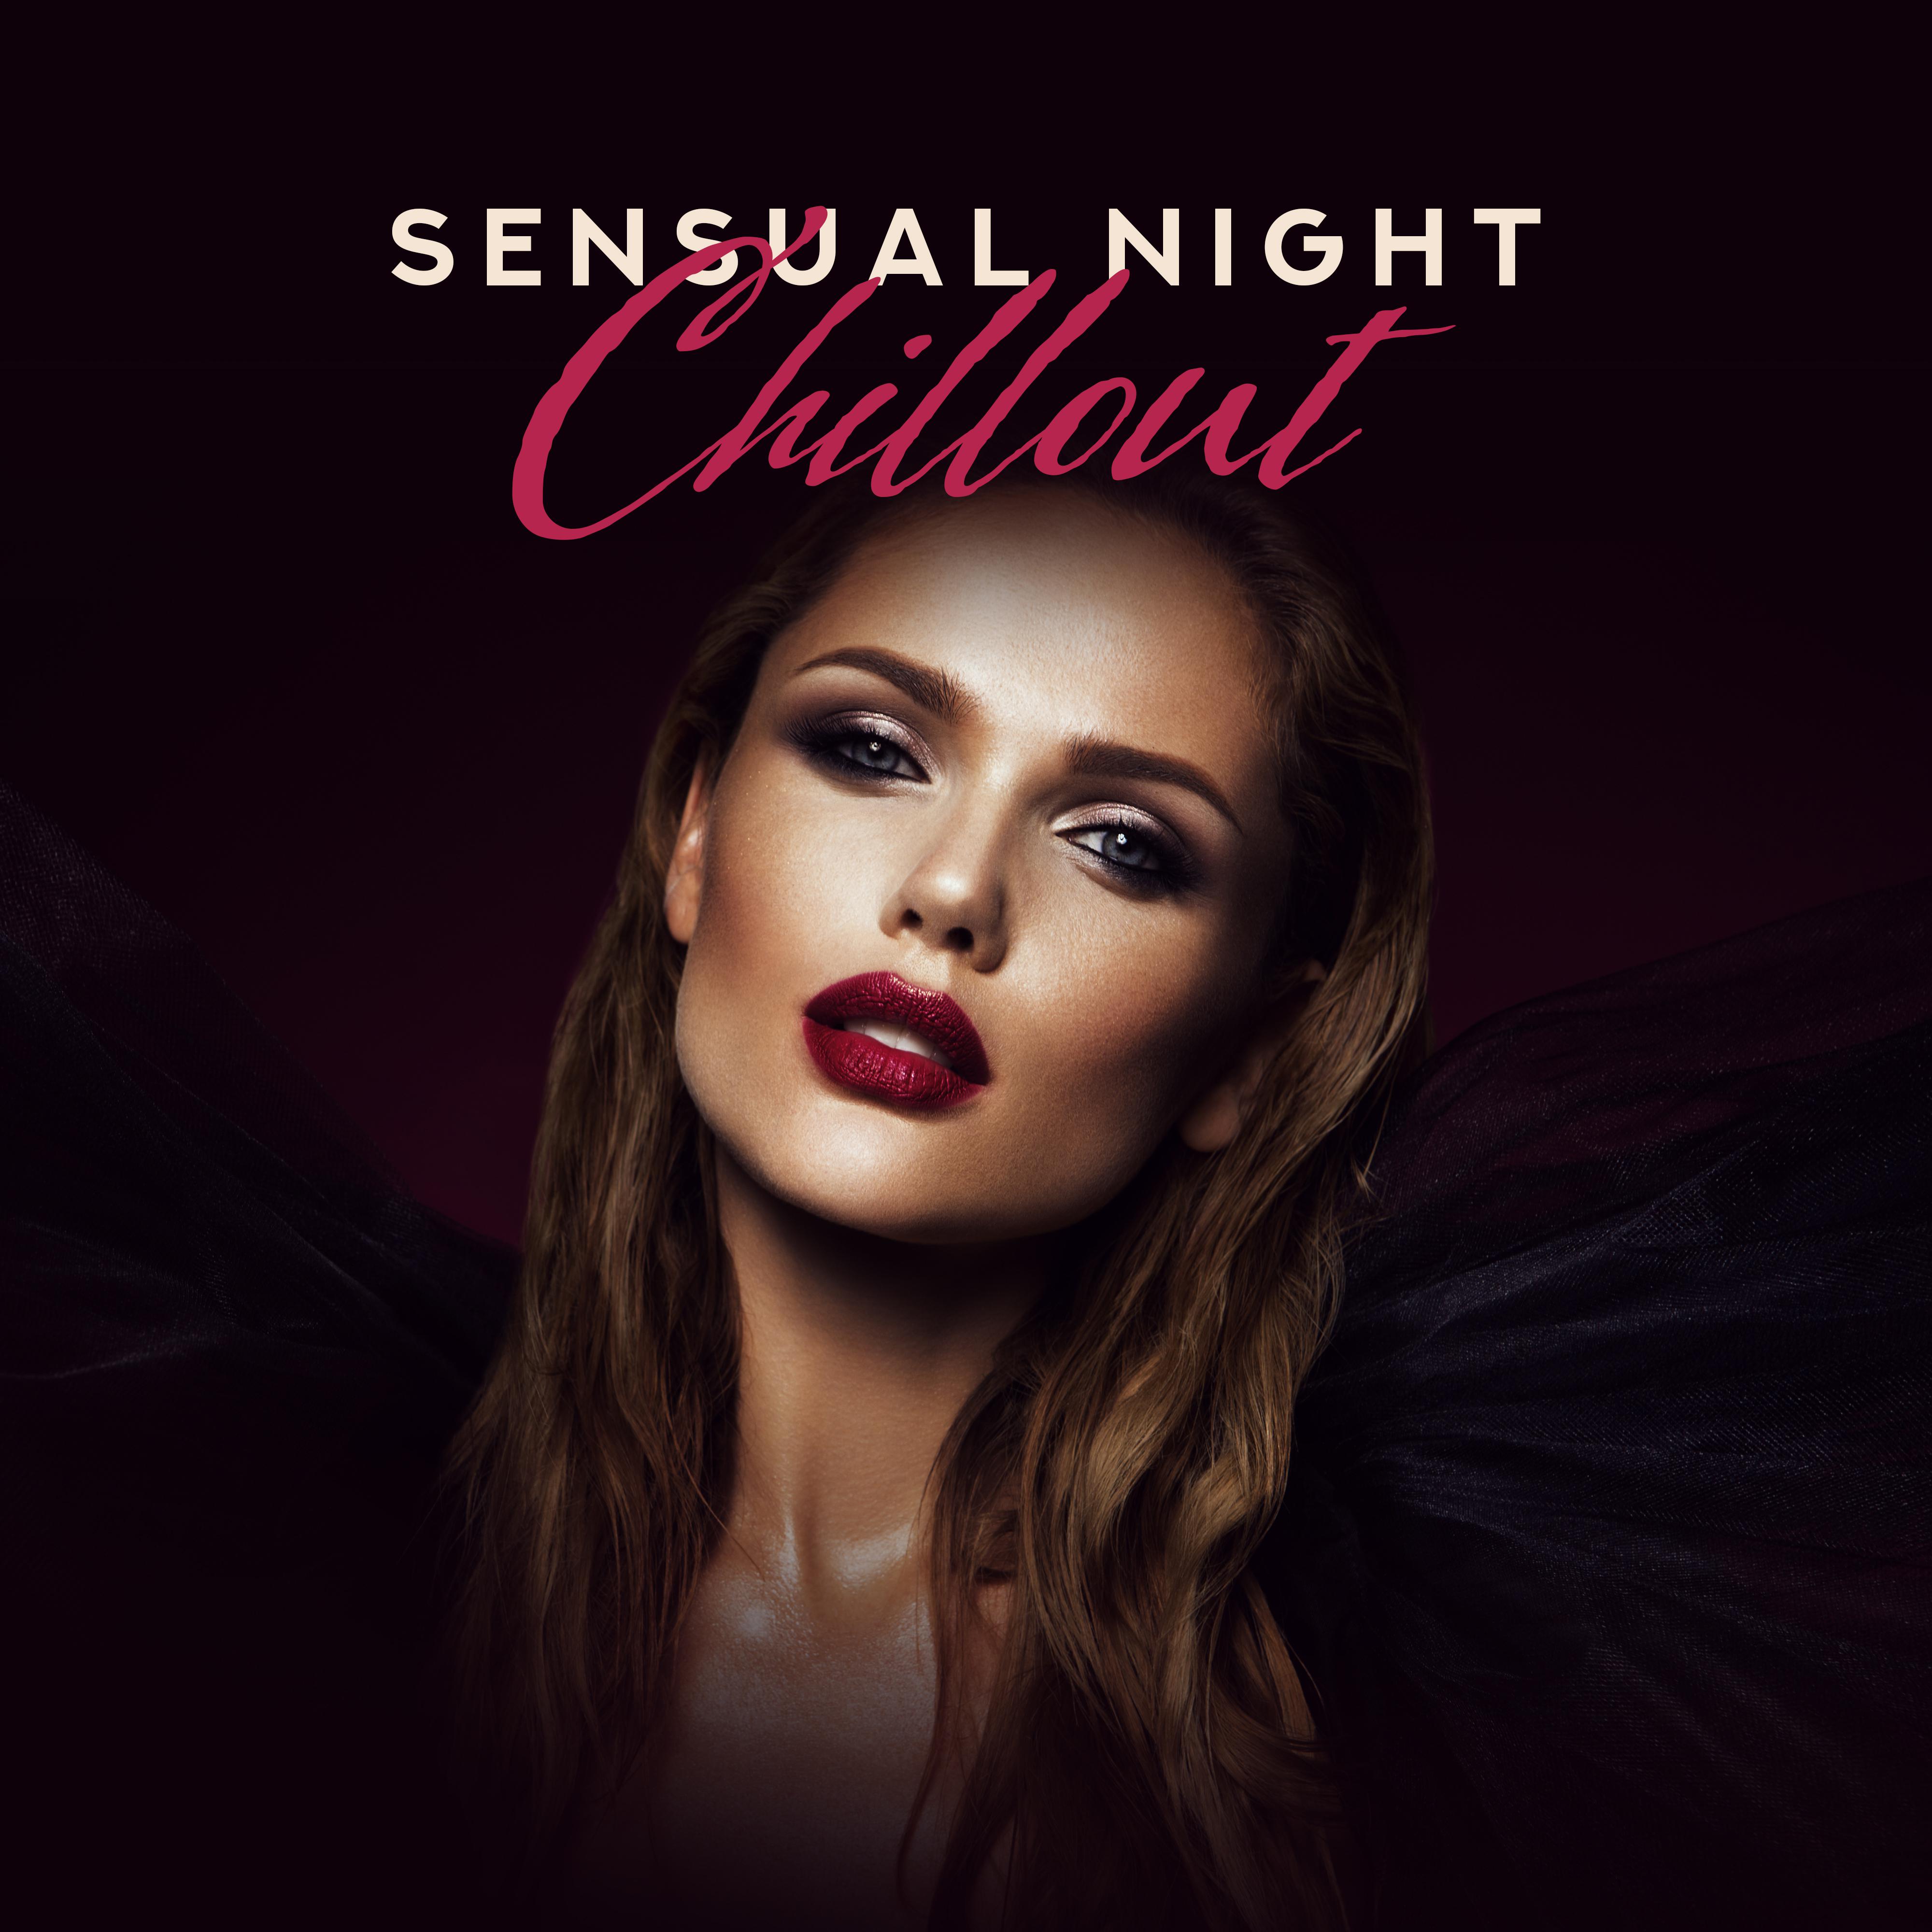 Sensual Night Chillout: *** Music for Relaxation, Making Love, Tantric Chill Out, Chillout **** Vibrations, Lounge Music, Erotic Noises for Lovers